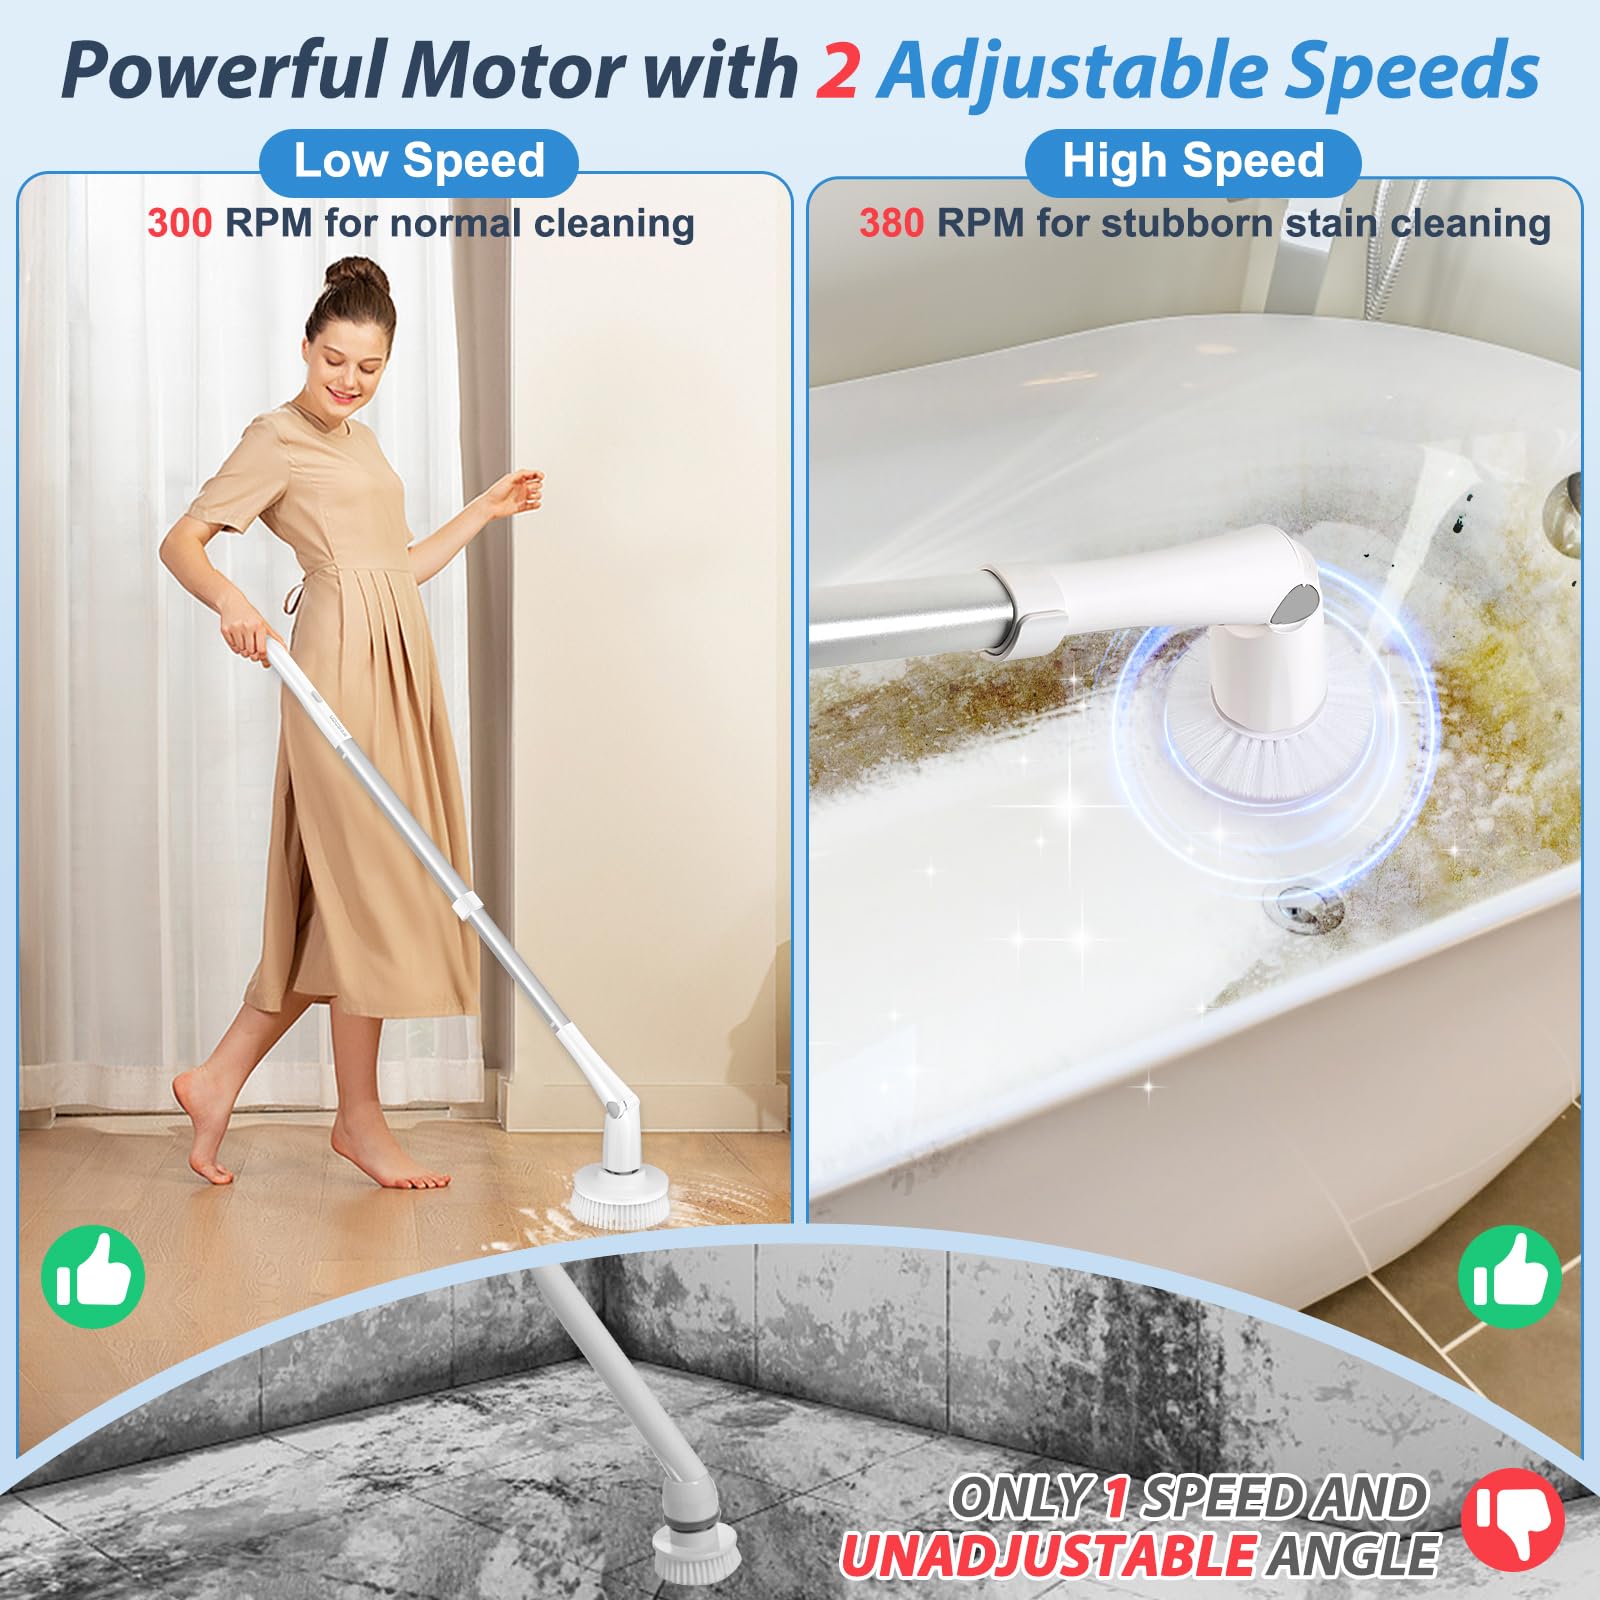 MABOGU Electric Spin Scrubber, Cordless Shower Scrubber with 8 Replaceable Brush Heads, Bathroom Scrubber Dual Speeds, Shower Cleaning Brush with Extension Arm for Bathroom Tub Tile Floor(Grey&White)